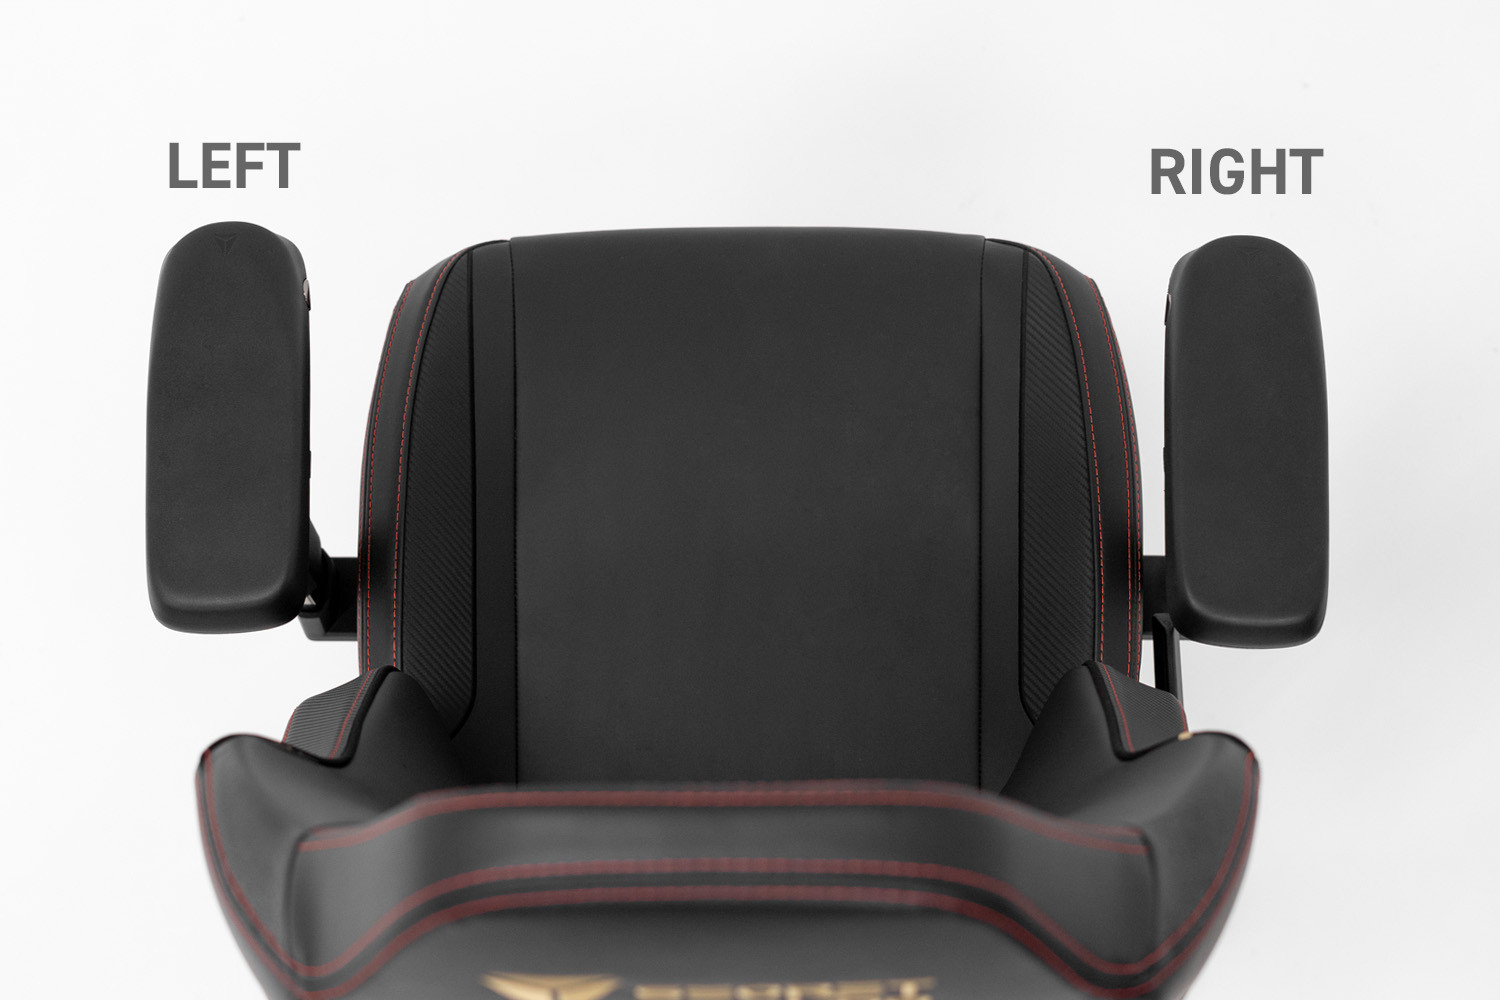 Secretlab Accessories To Upgrade Your Gaming Chair